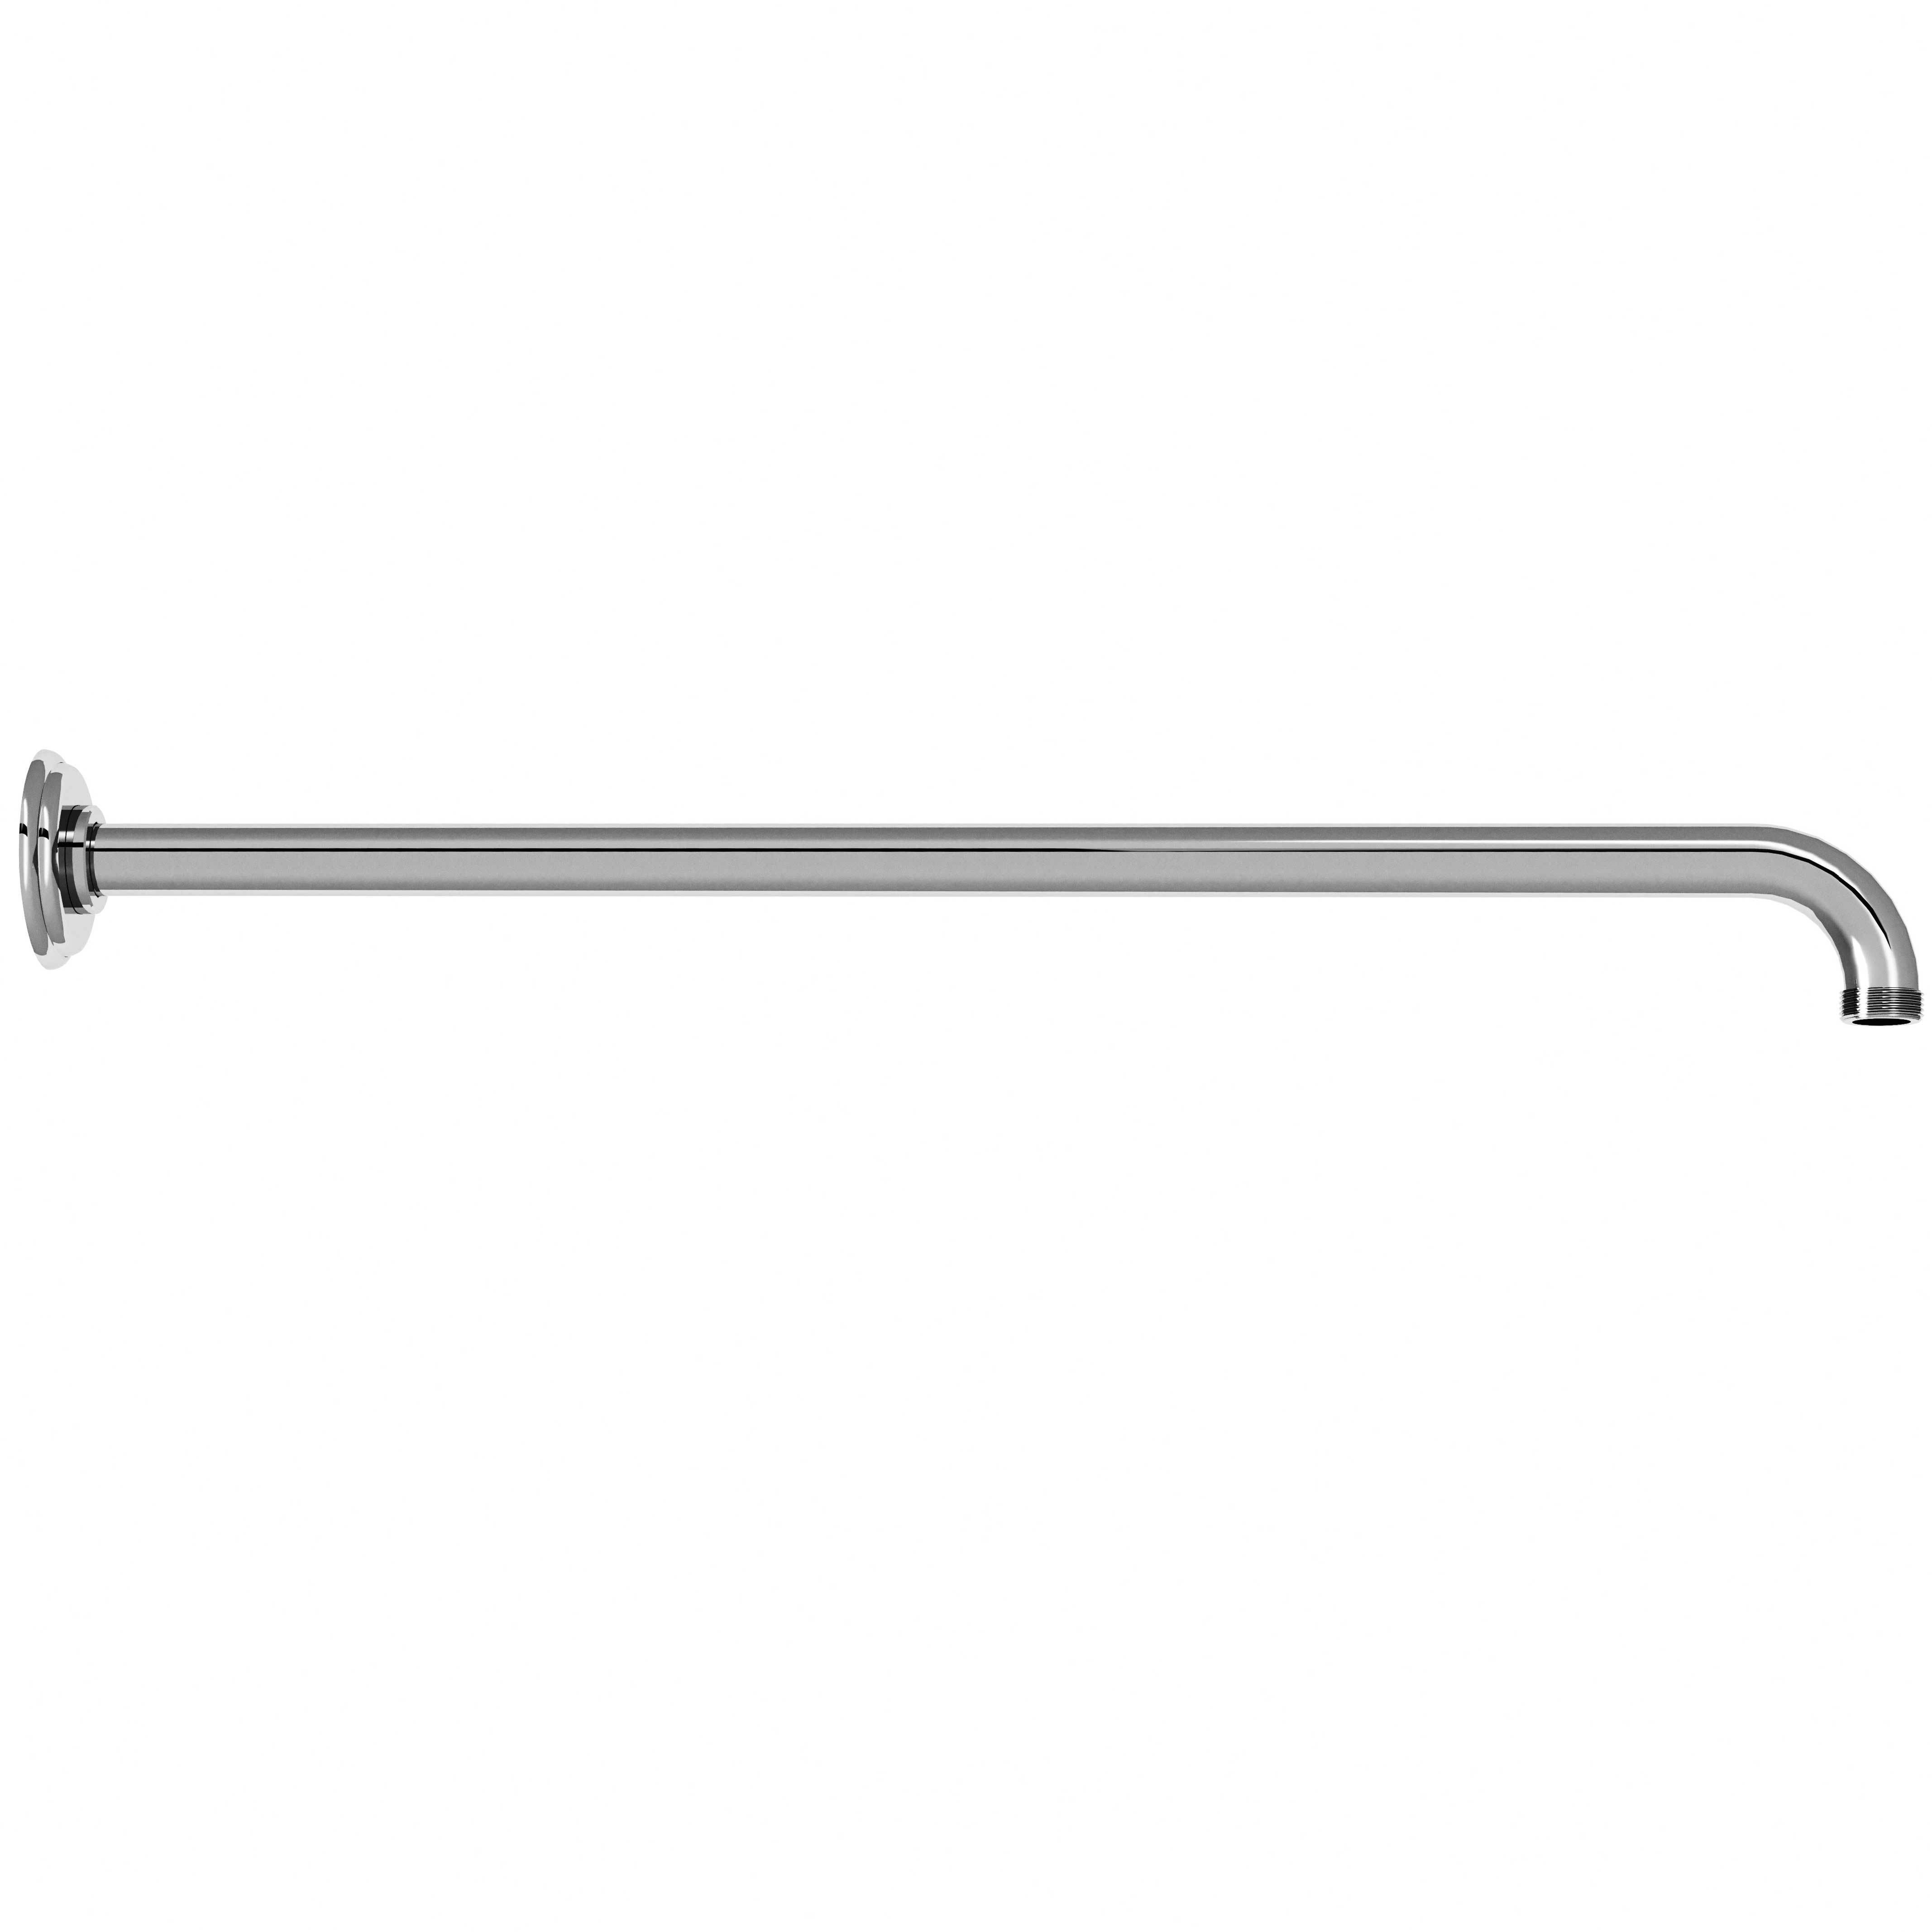 M04-2W450 Wall mounted shower arm 450mm